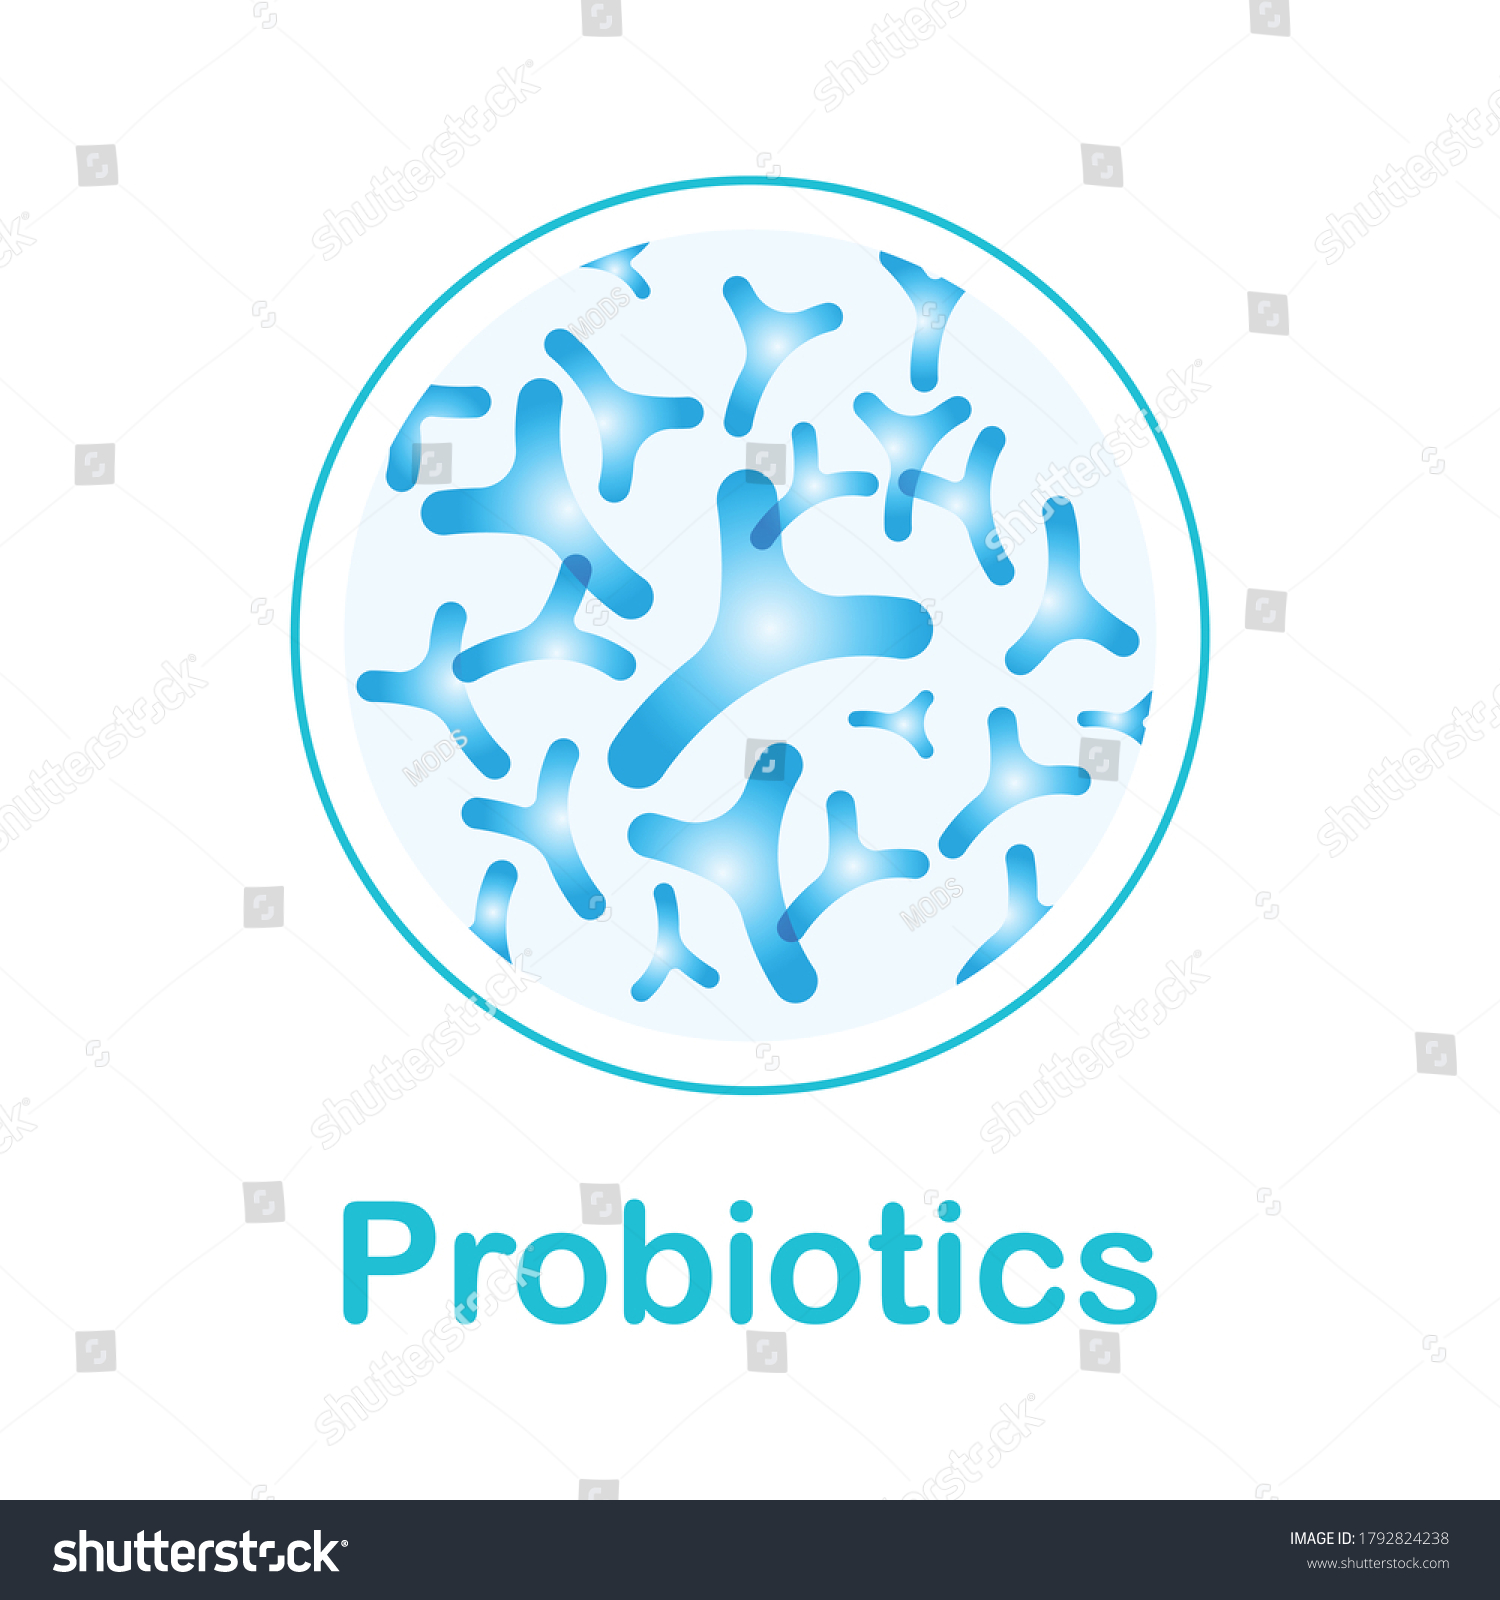 SVG of Probiotic bacteria icon design isolated on white background svg